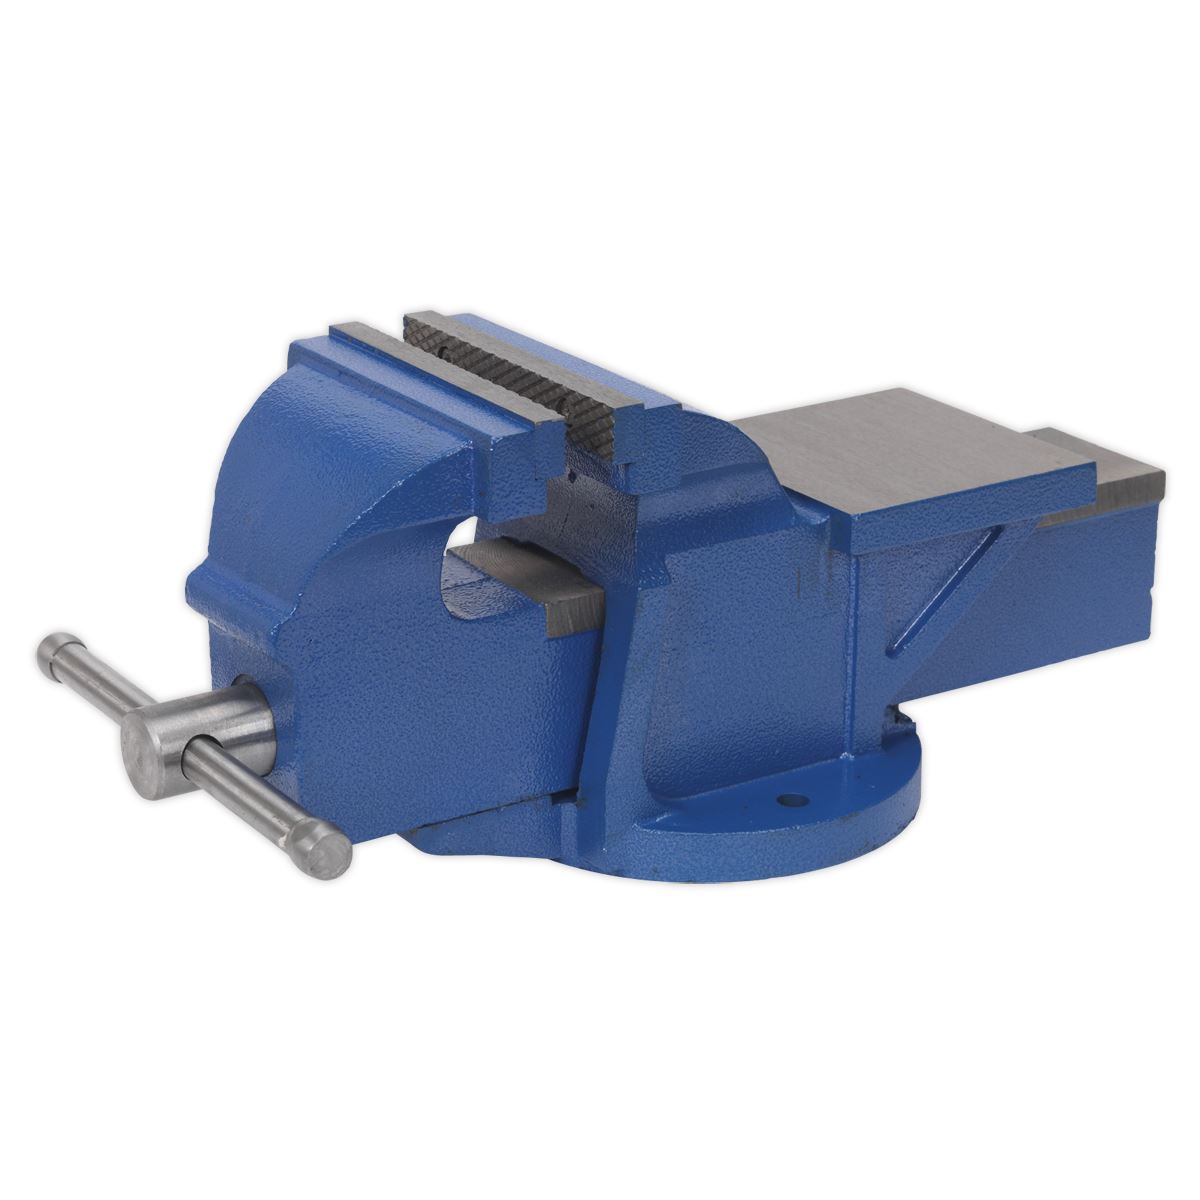 Sealey Bench Grinder & Vice Stand Deal